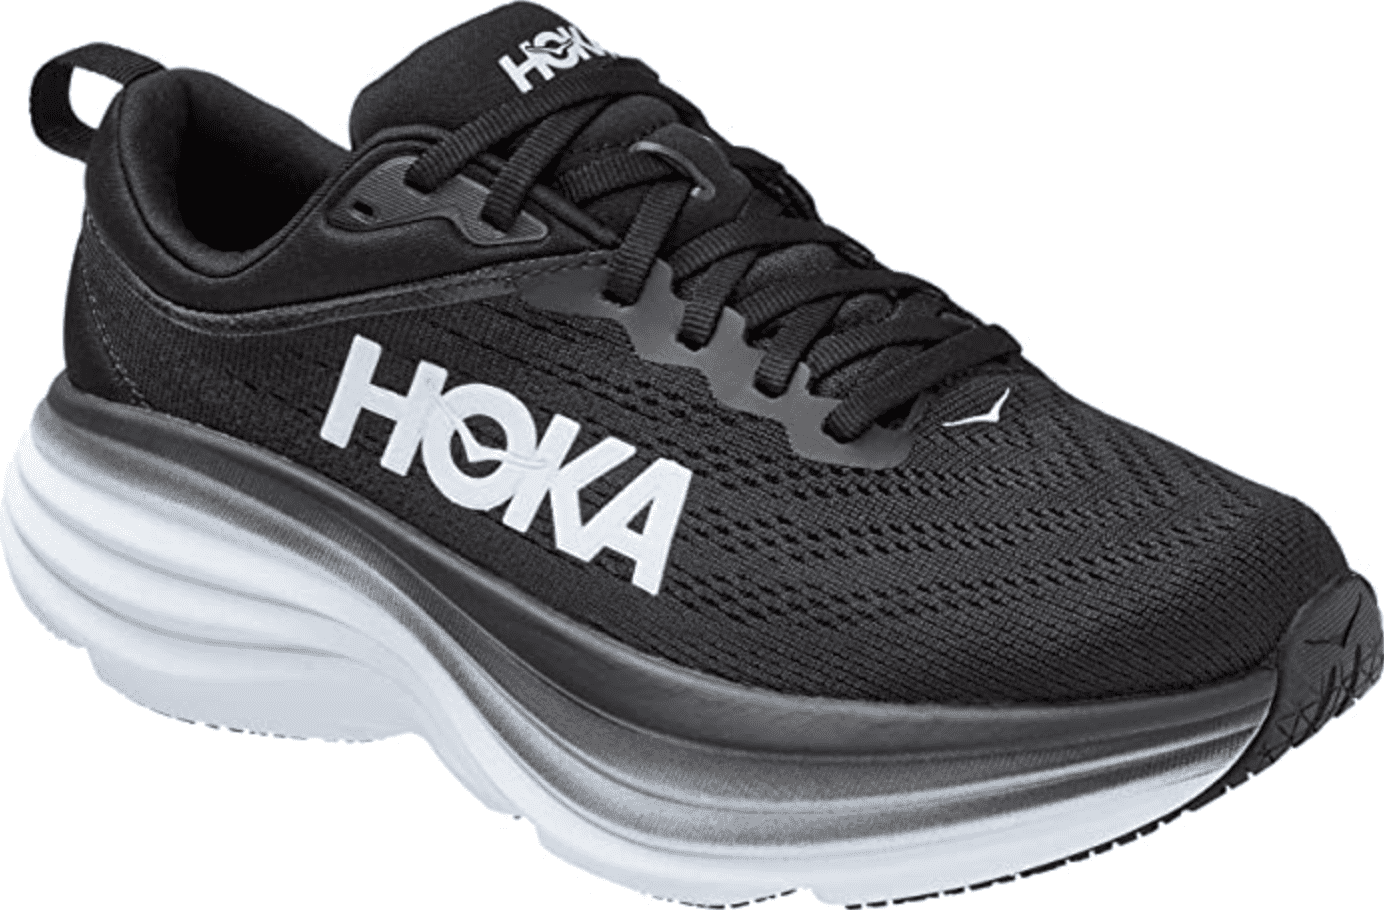 What Hoka Shoes Are Best for Nurses?